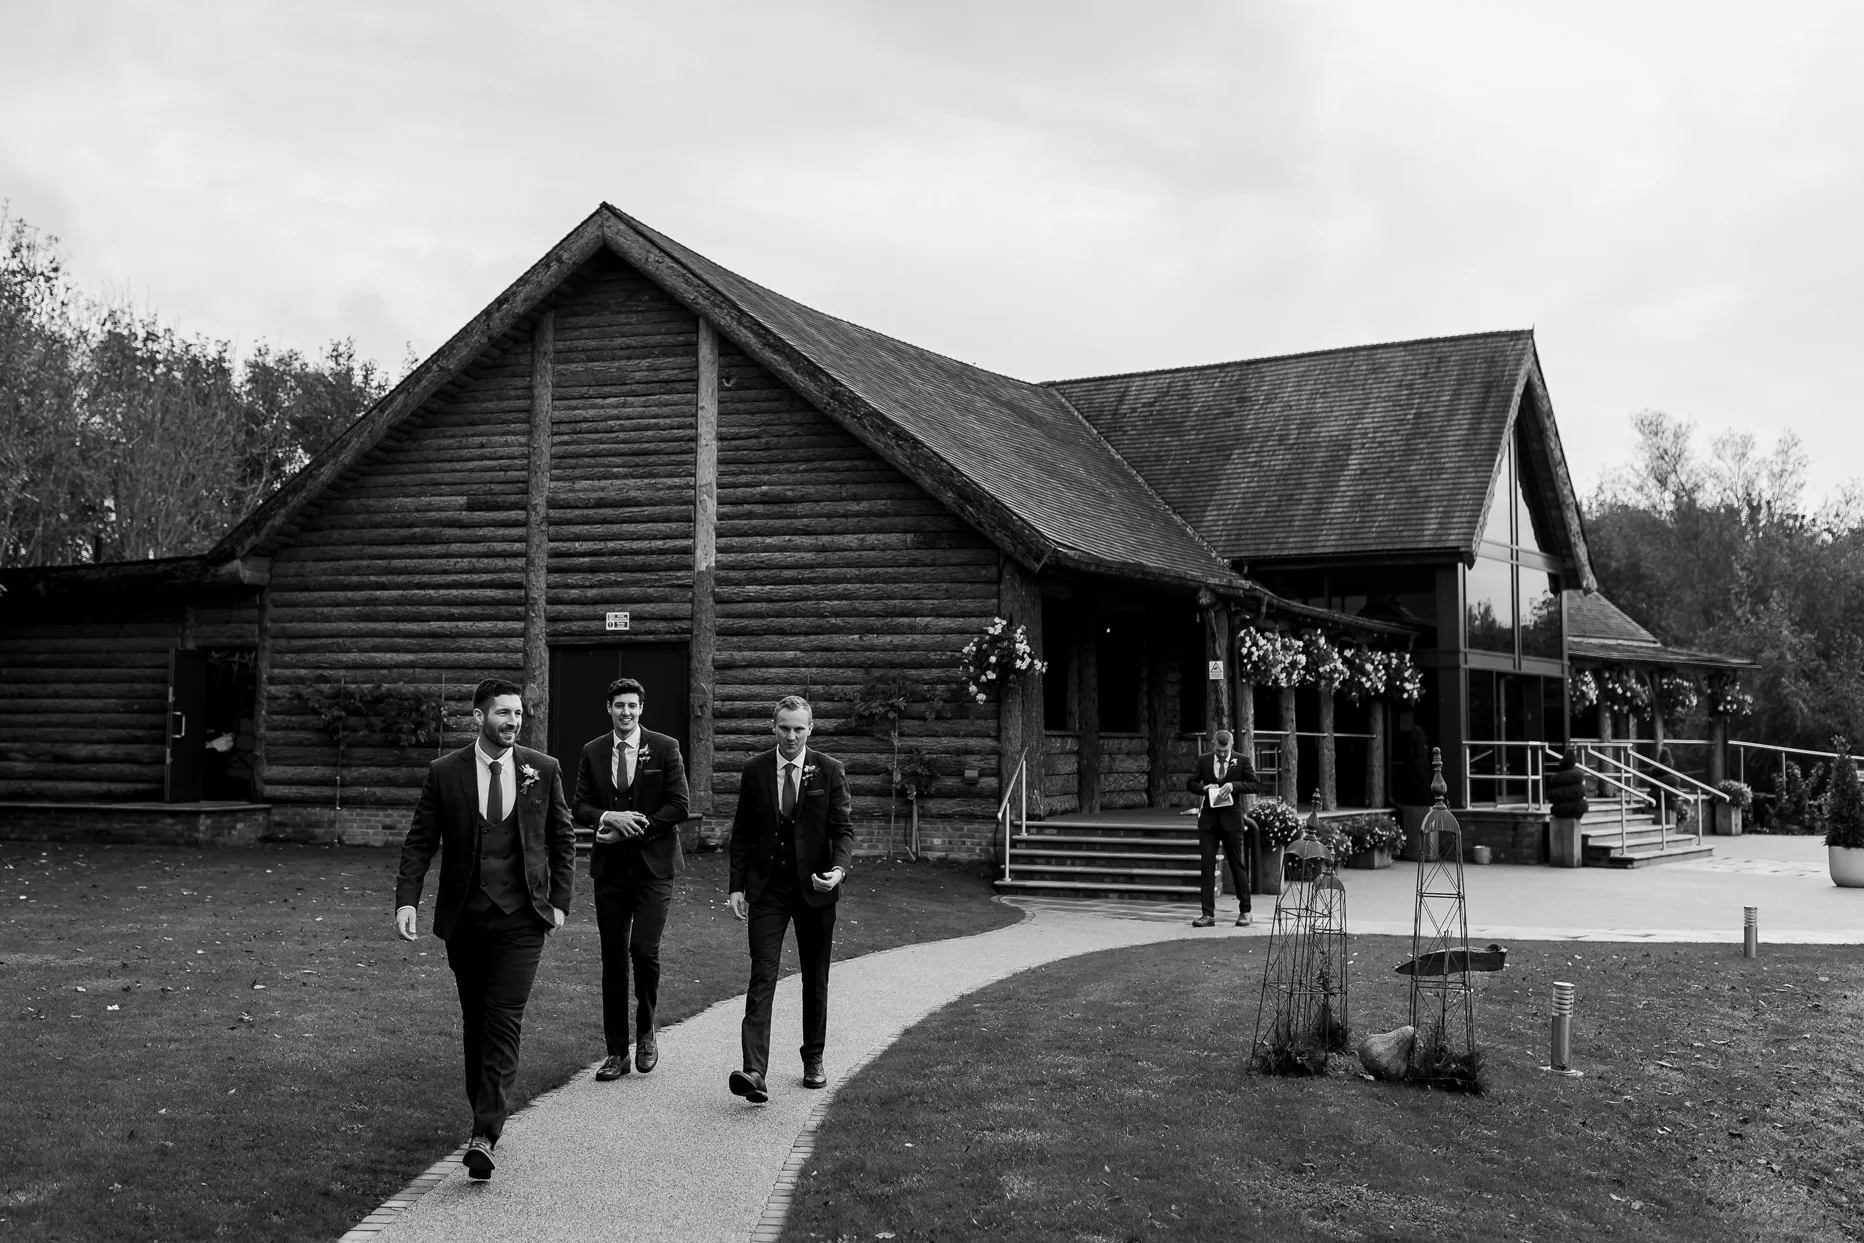 Groom walking with his groomsmen to the wedding ceremony. The grand lodge at Oaklands can be seen in the background.